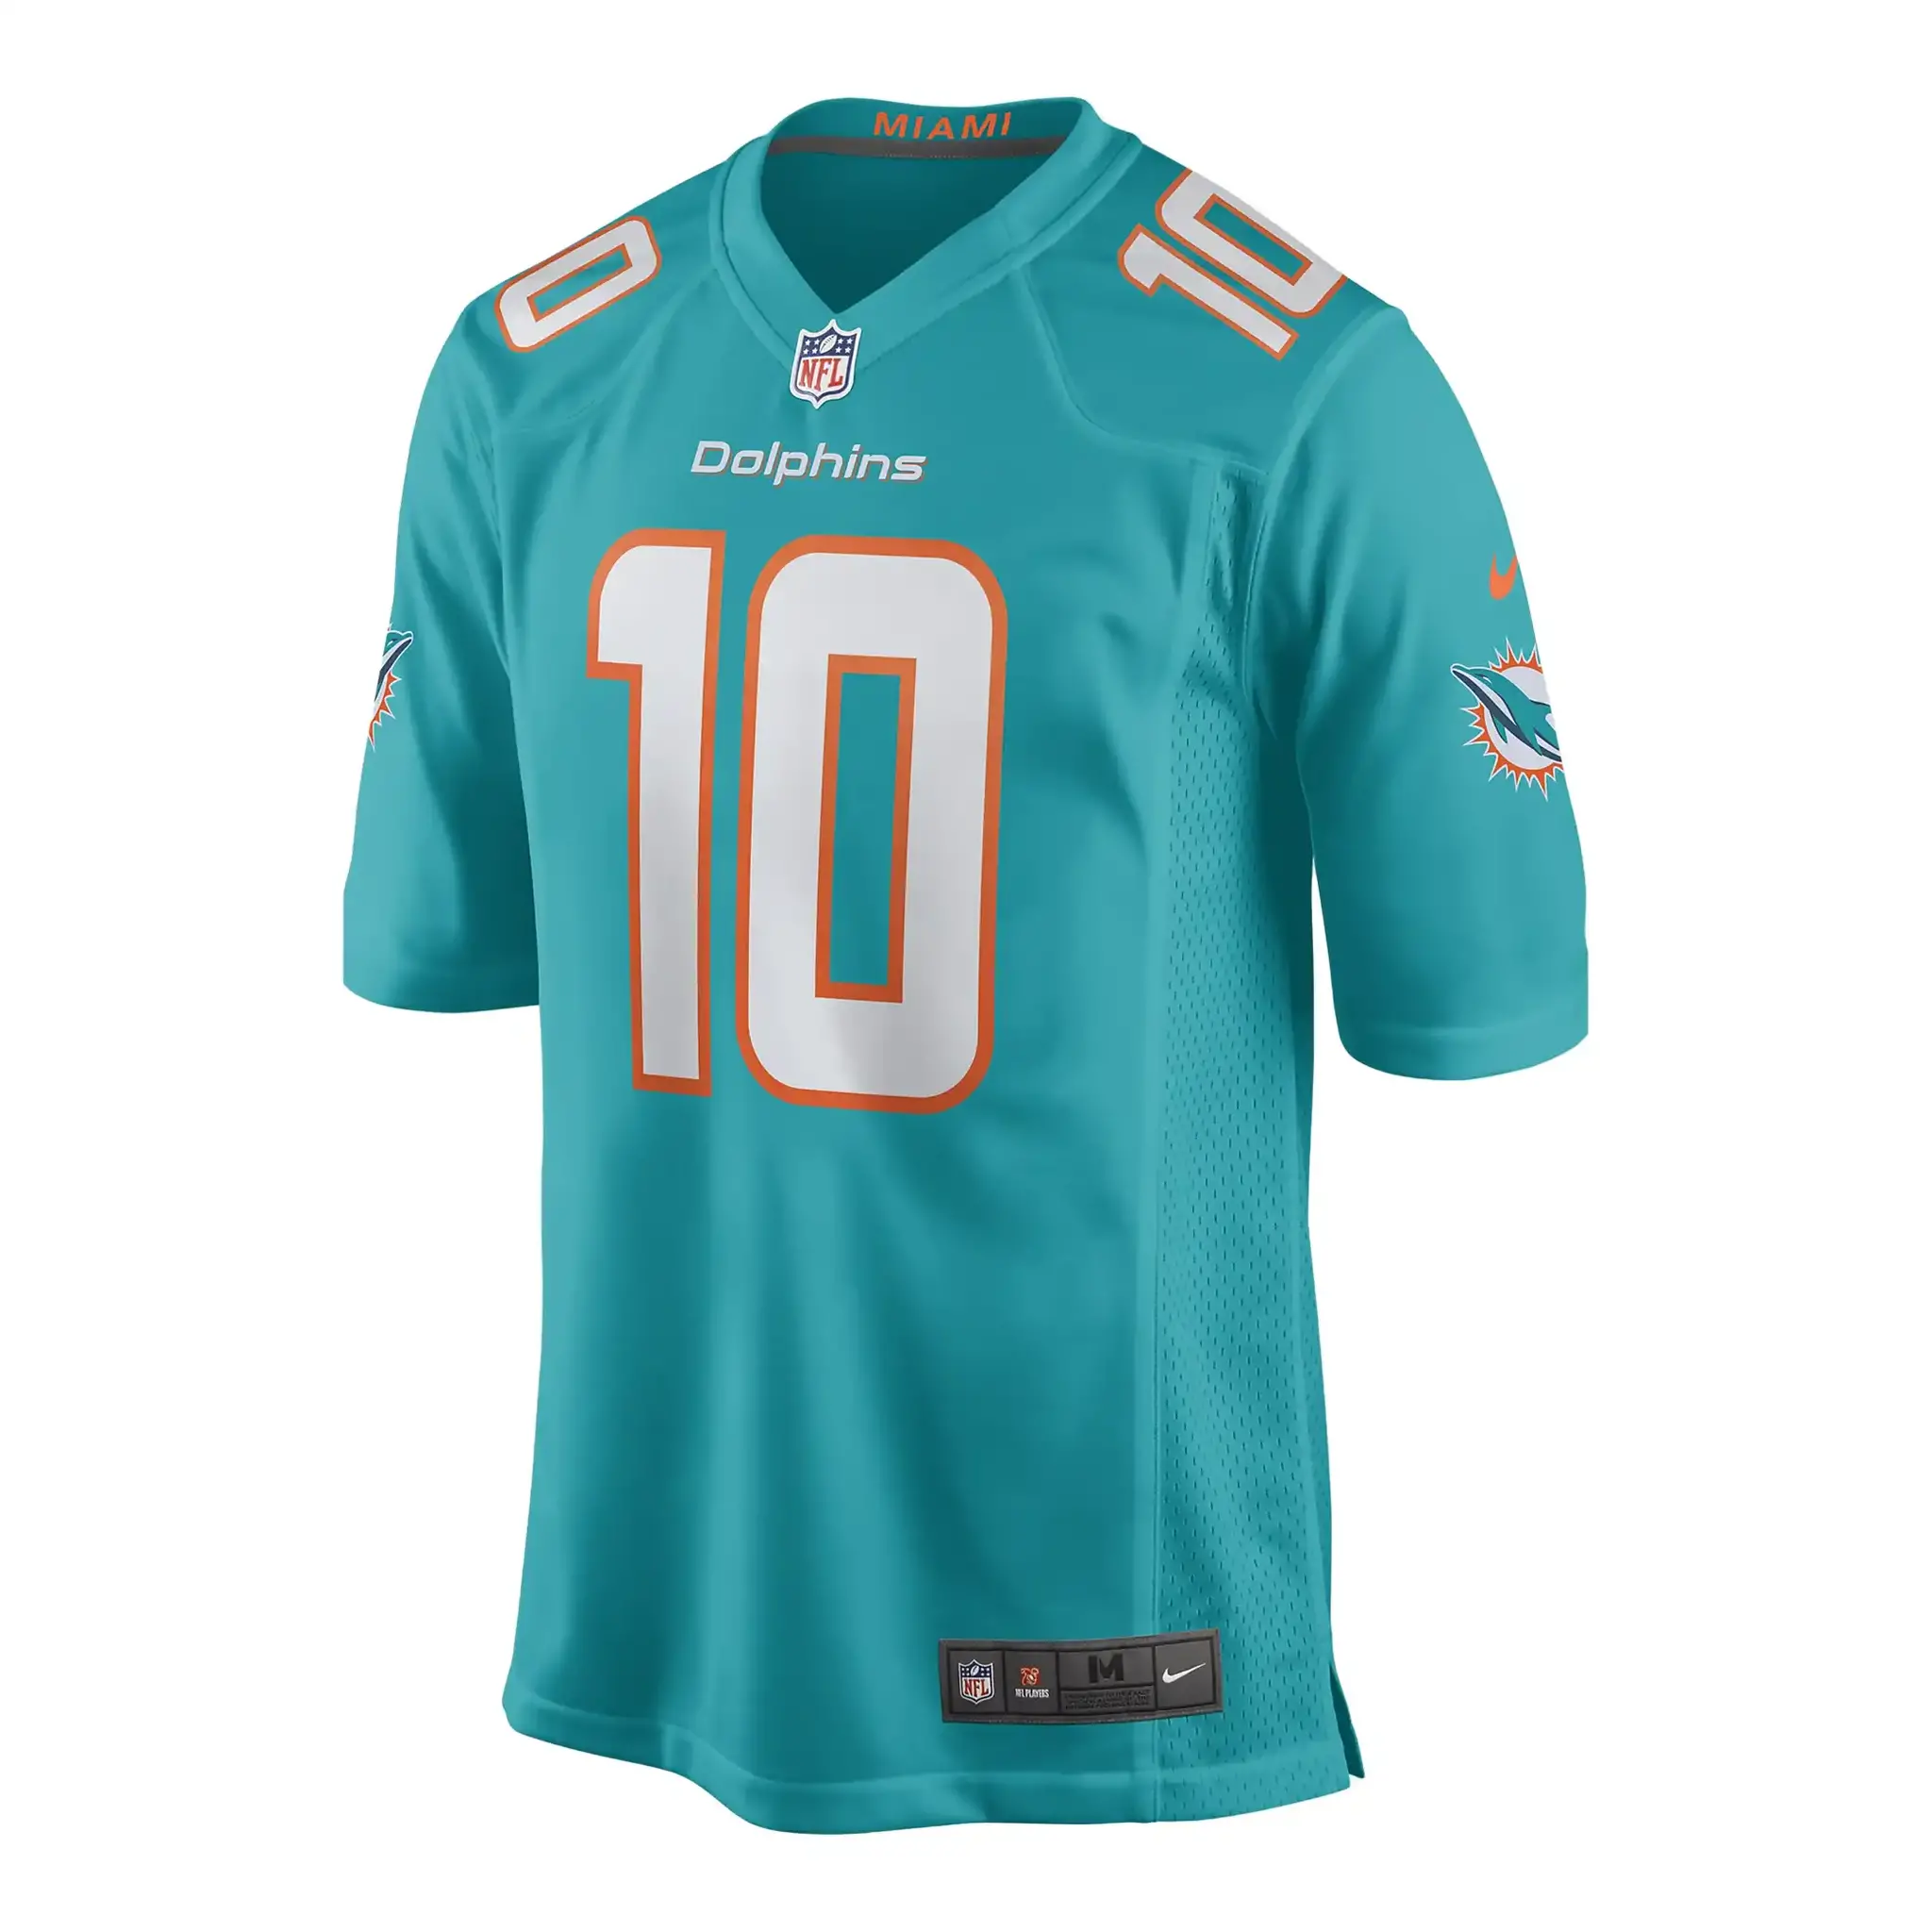 Nike NFL Miami Dolphins Home Jersey Tyreek Hill